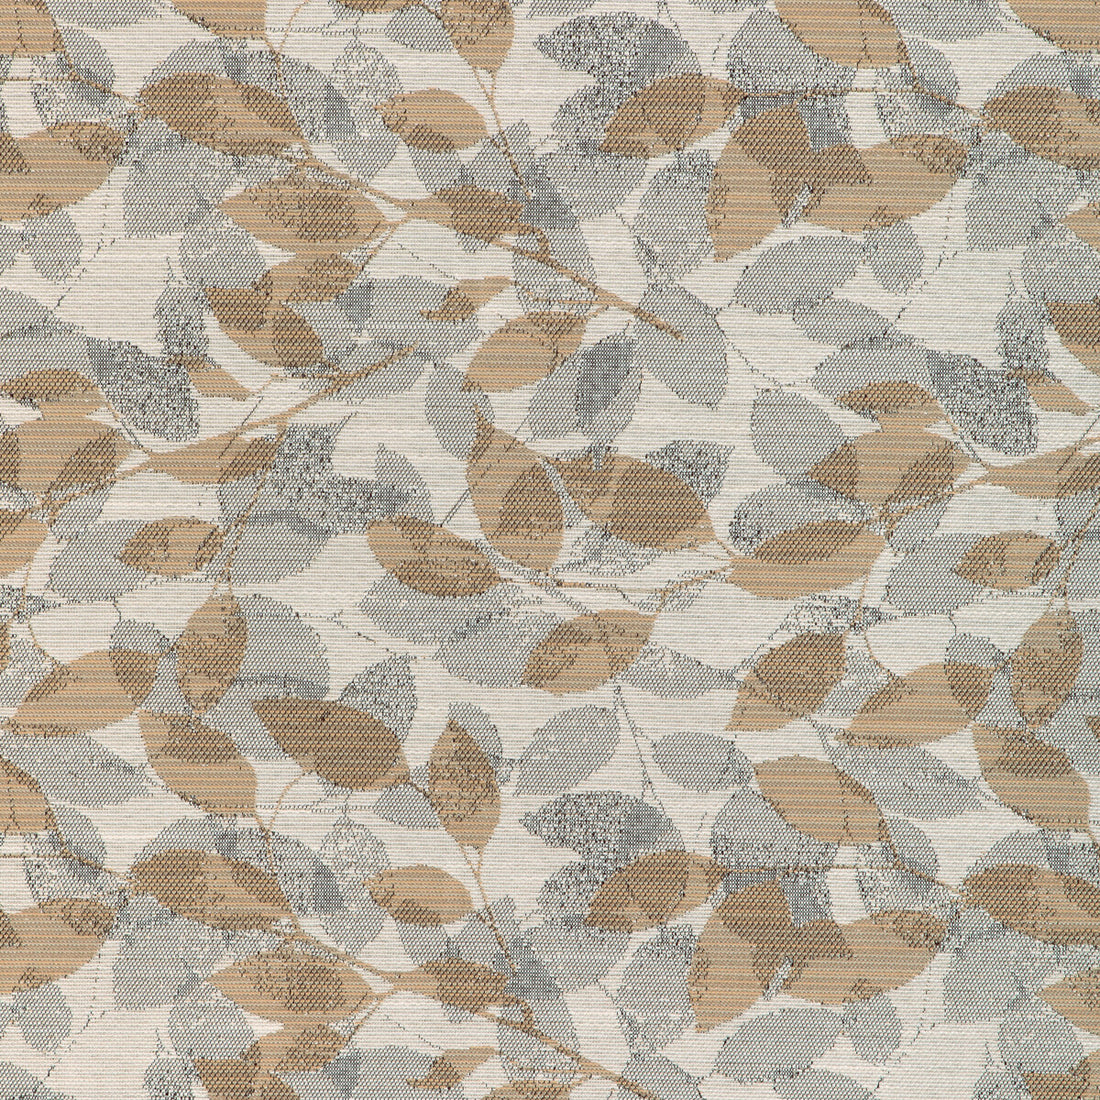 Leaf Dance fabric in sandstone color - pattern 37053.1161.0 - by Kravet Contract in the Chesapeake collection